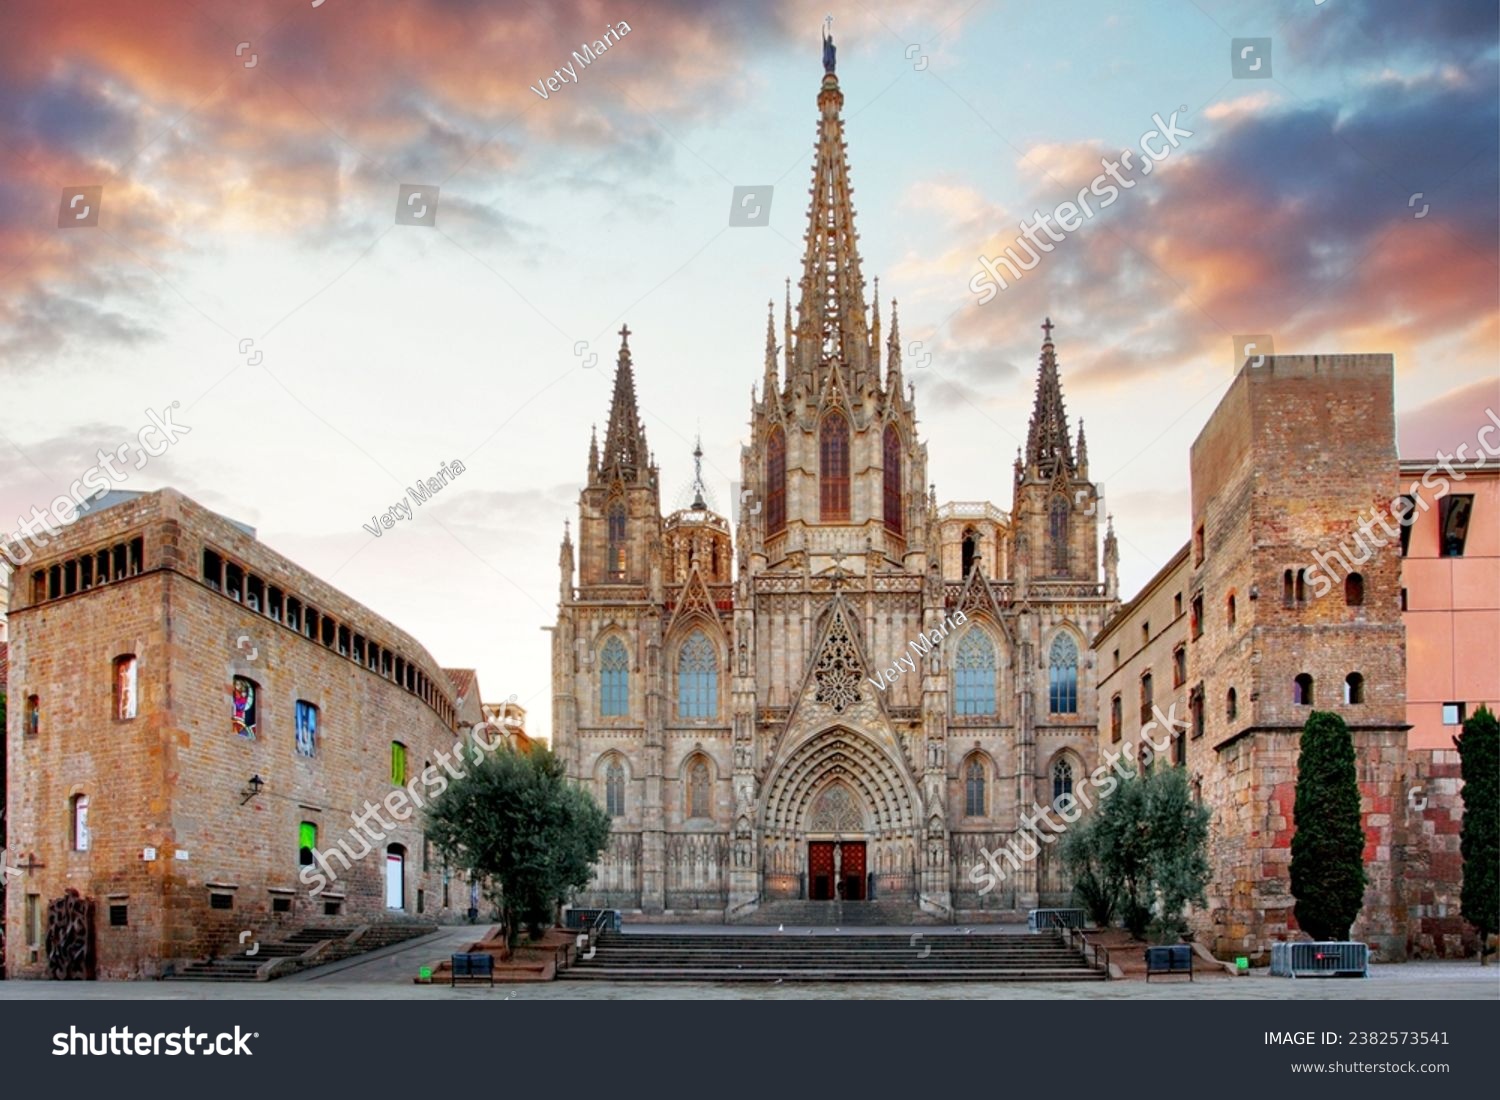 These images convey the rich culture and modern charm of this Spanish gem. Ideal for projects celebrating European culture, urban life, travel, and the heritage of Barcelona. #2382573541